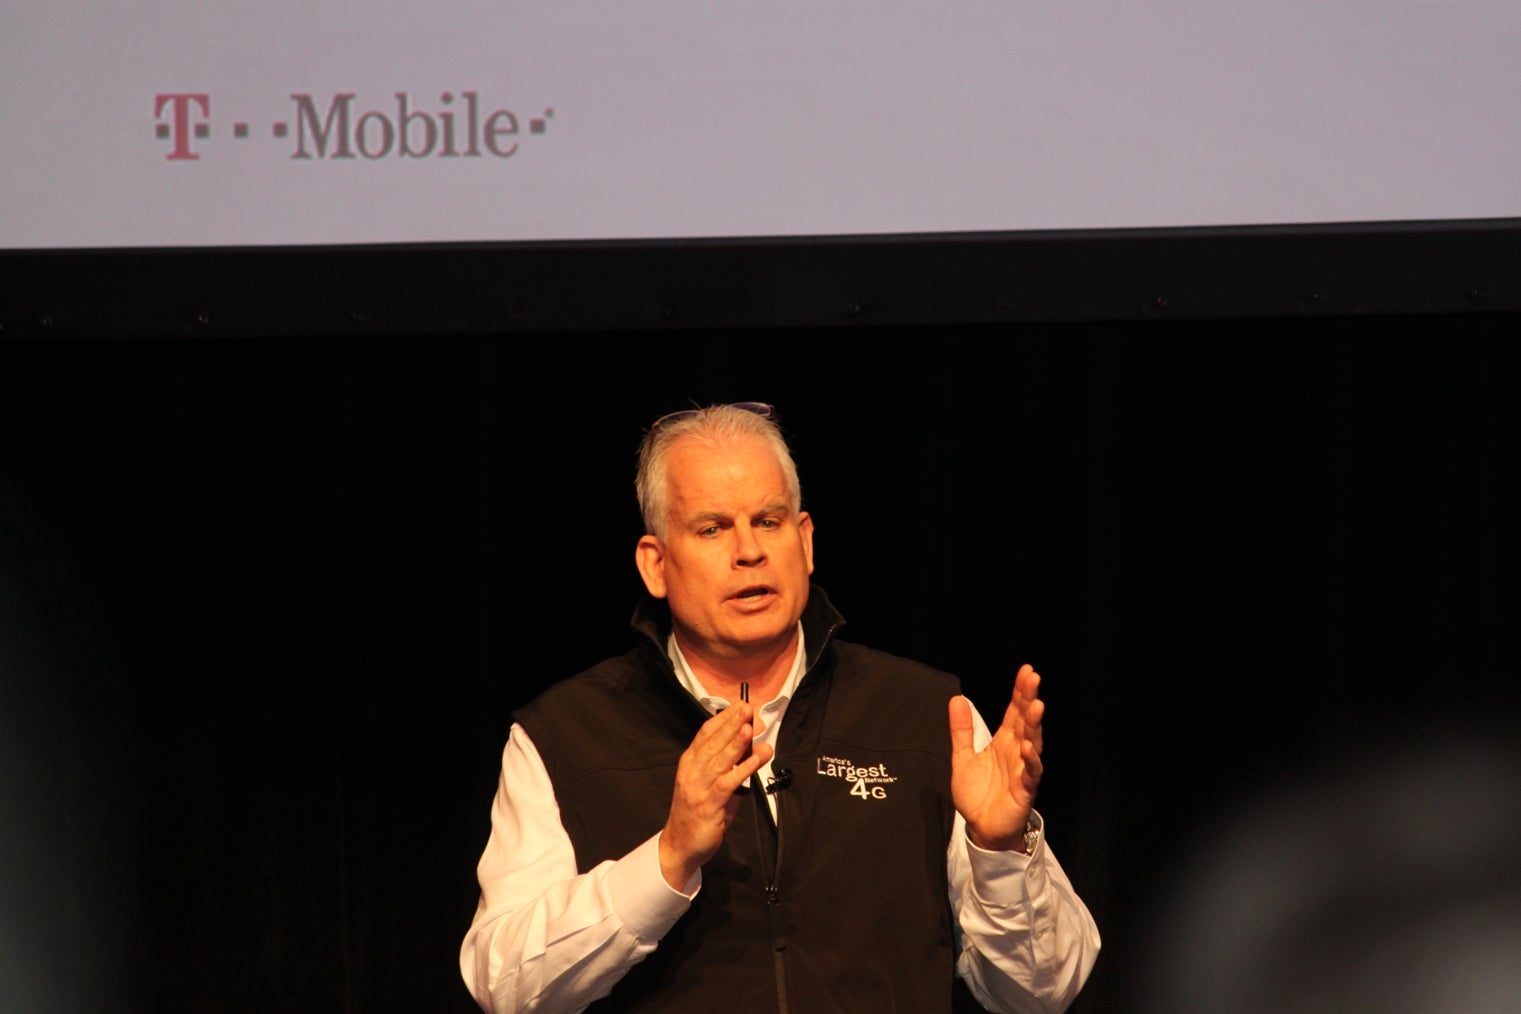 T-Mobile's CTO Neville Ray - T-Mobile 95% done refarming 1900MHz spectrum; carrier delayed by Sandy